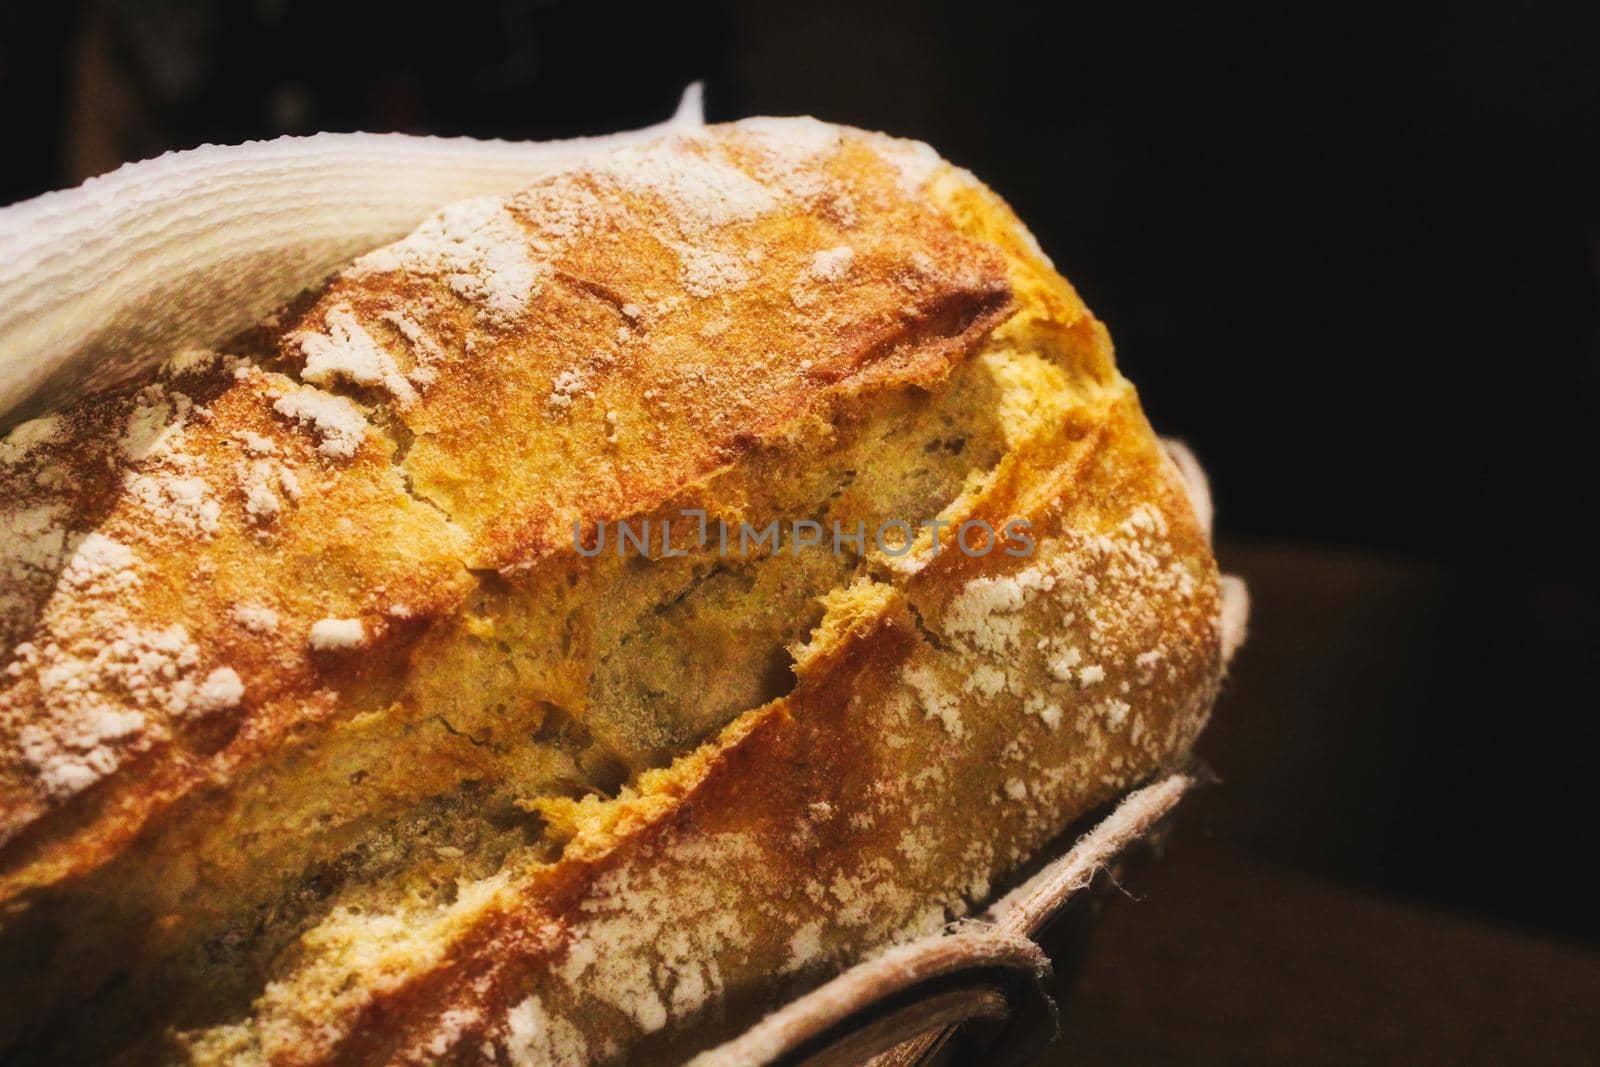 Freshly baked rustic white wheat flour bread loaf roll in a basket against a black background by tennesseewitney